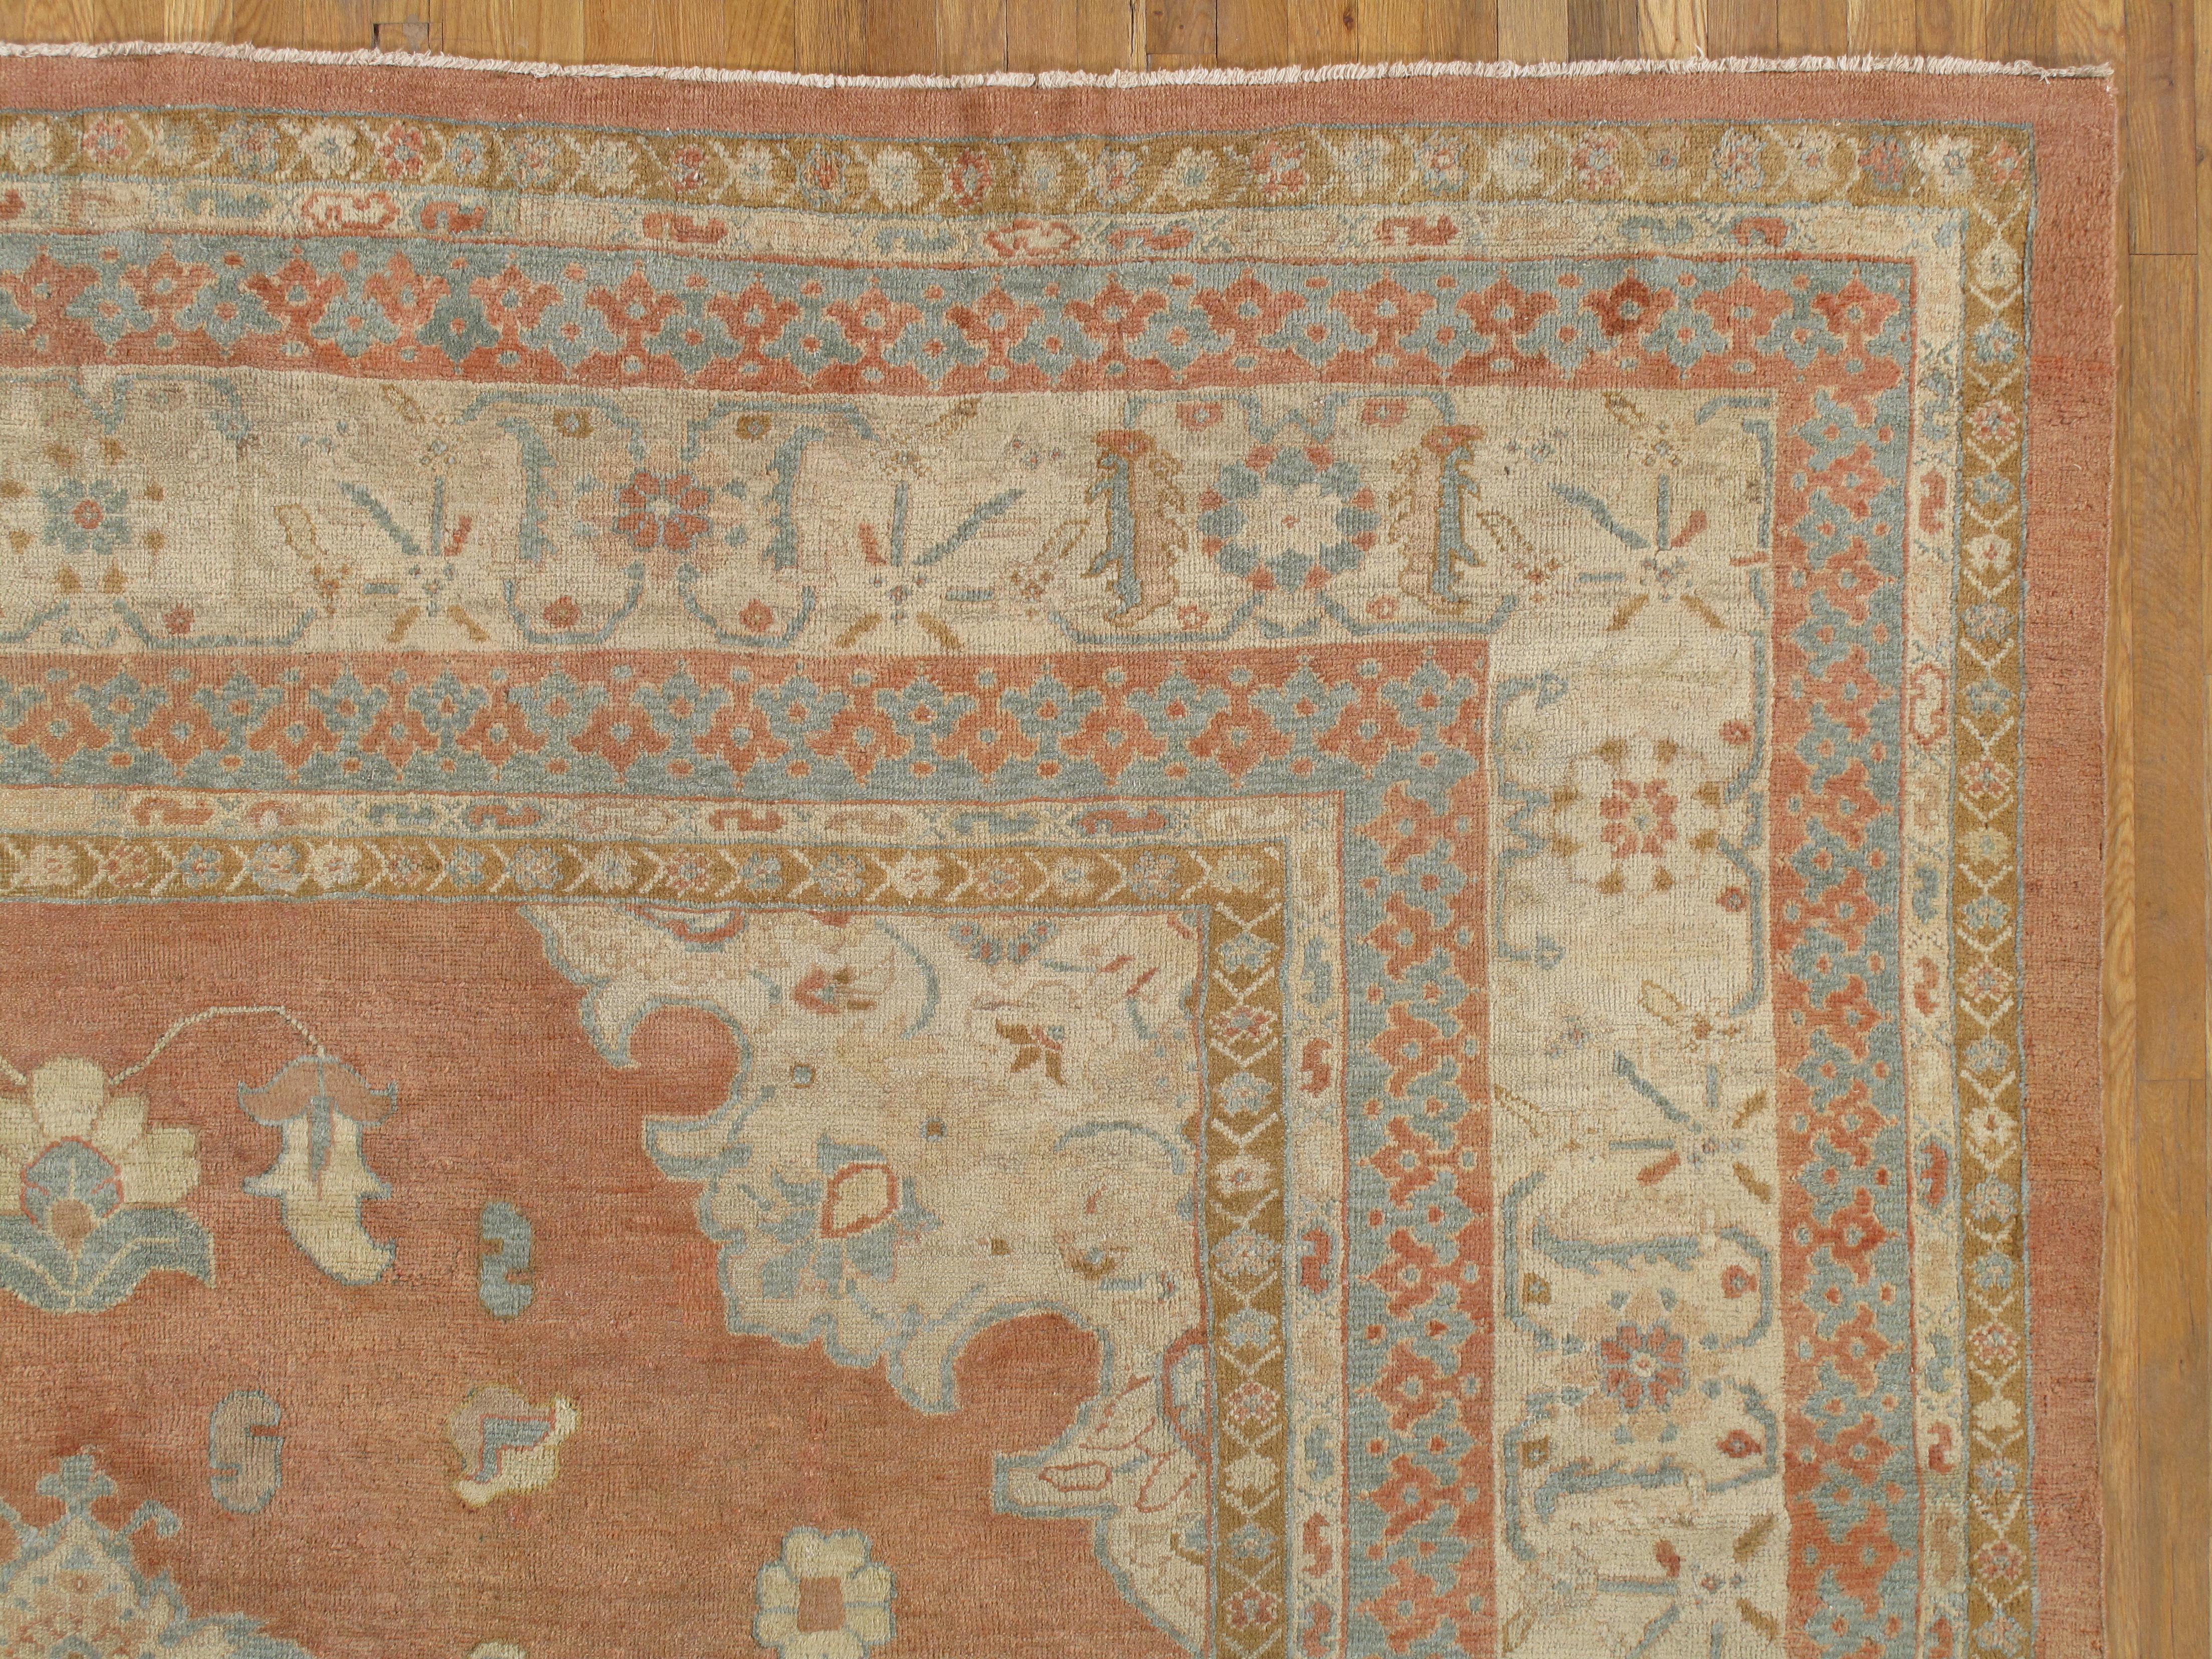 In 1883, Ziegler and Co., of Manchester, England, established a Persian carpet manufacture in Sultanabad, Iran, employing designers from major Western department stores, like B. Altman and Liberty of London, to modify fanciful 16th-17th century